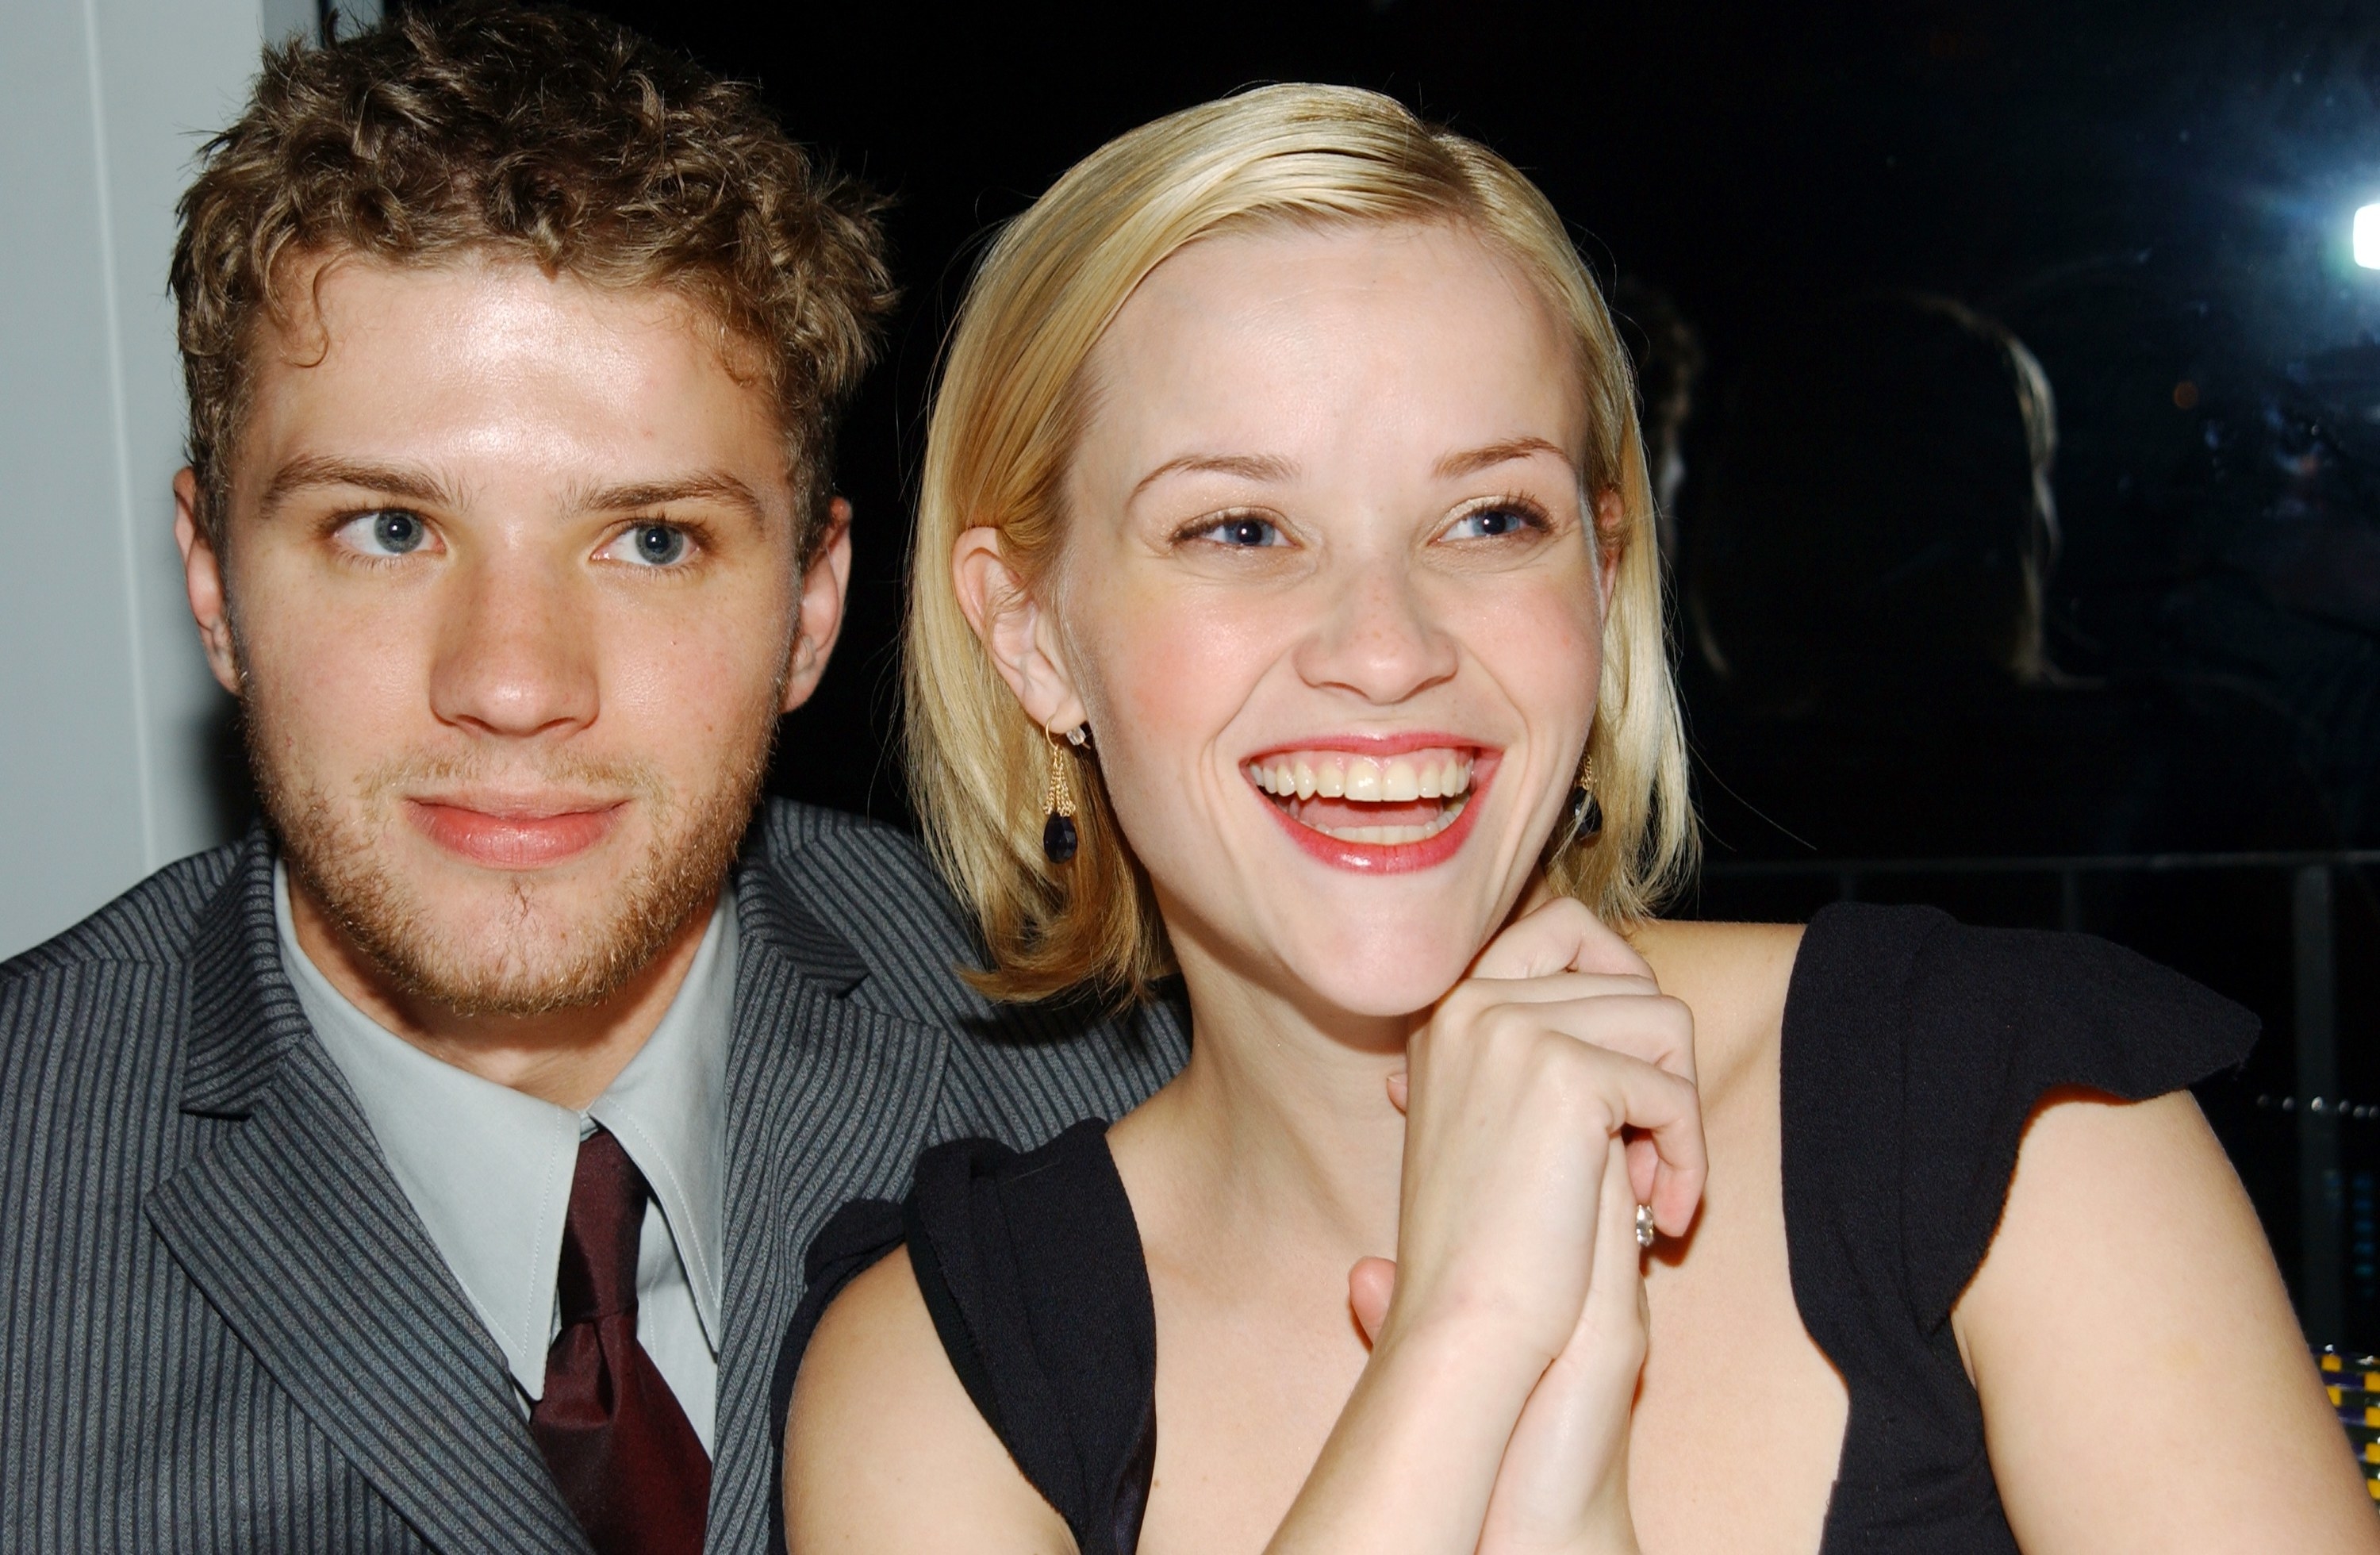 Ryan Phillippe and Reese Witherspoon in 2001